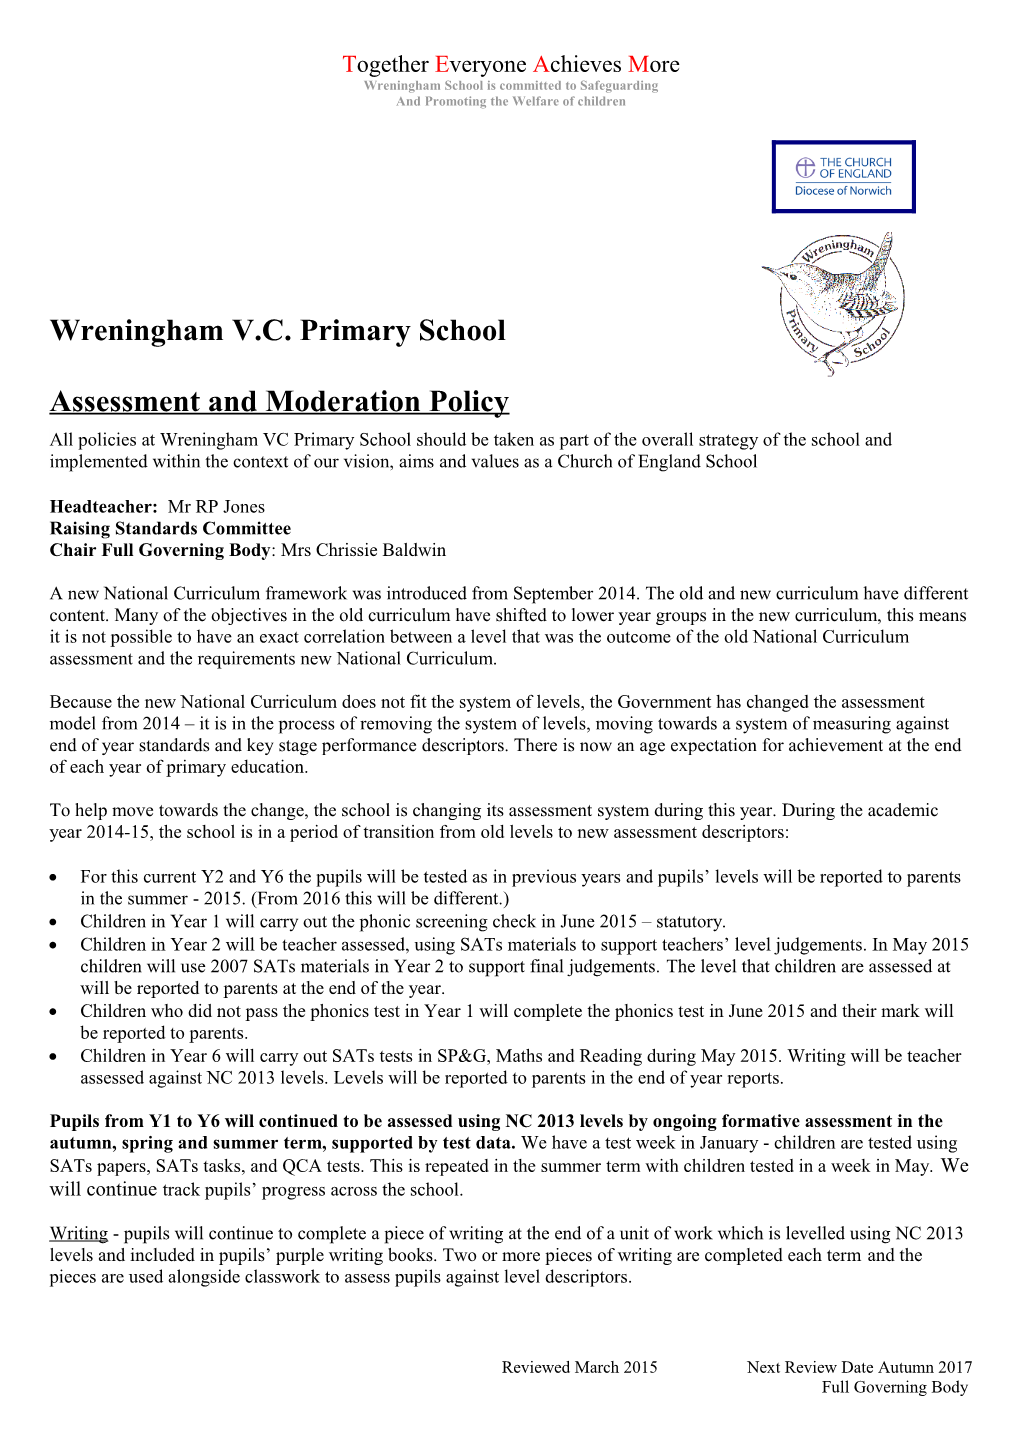 Assessment and Moderation Policy s1